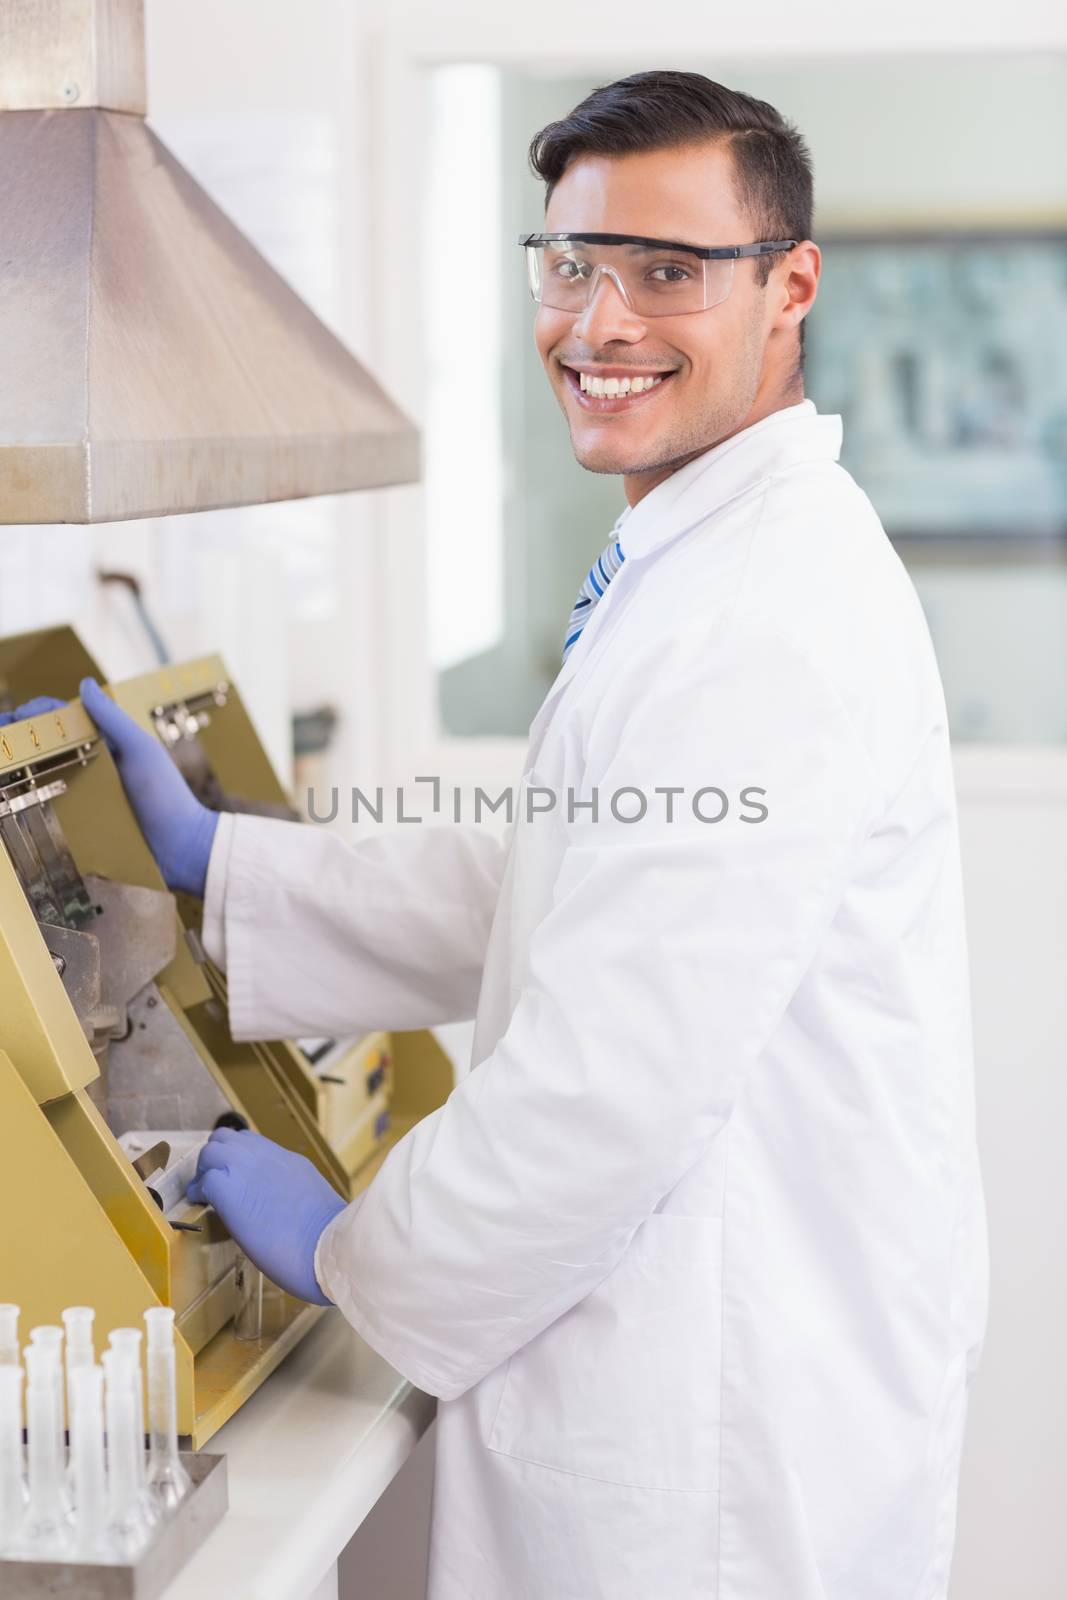 Scientist using technology for research in the lab